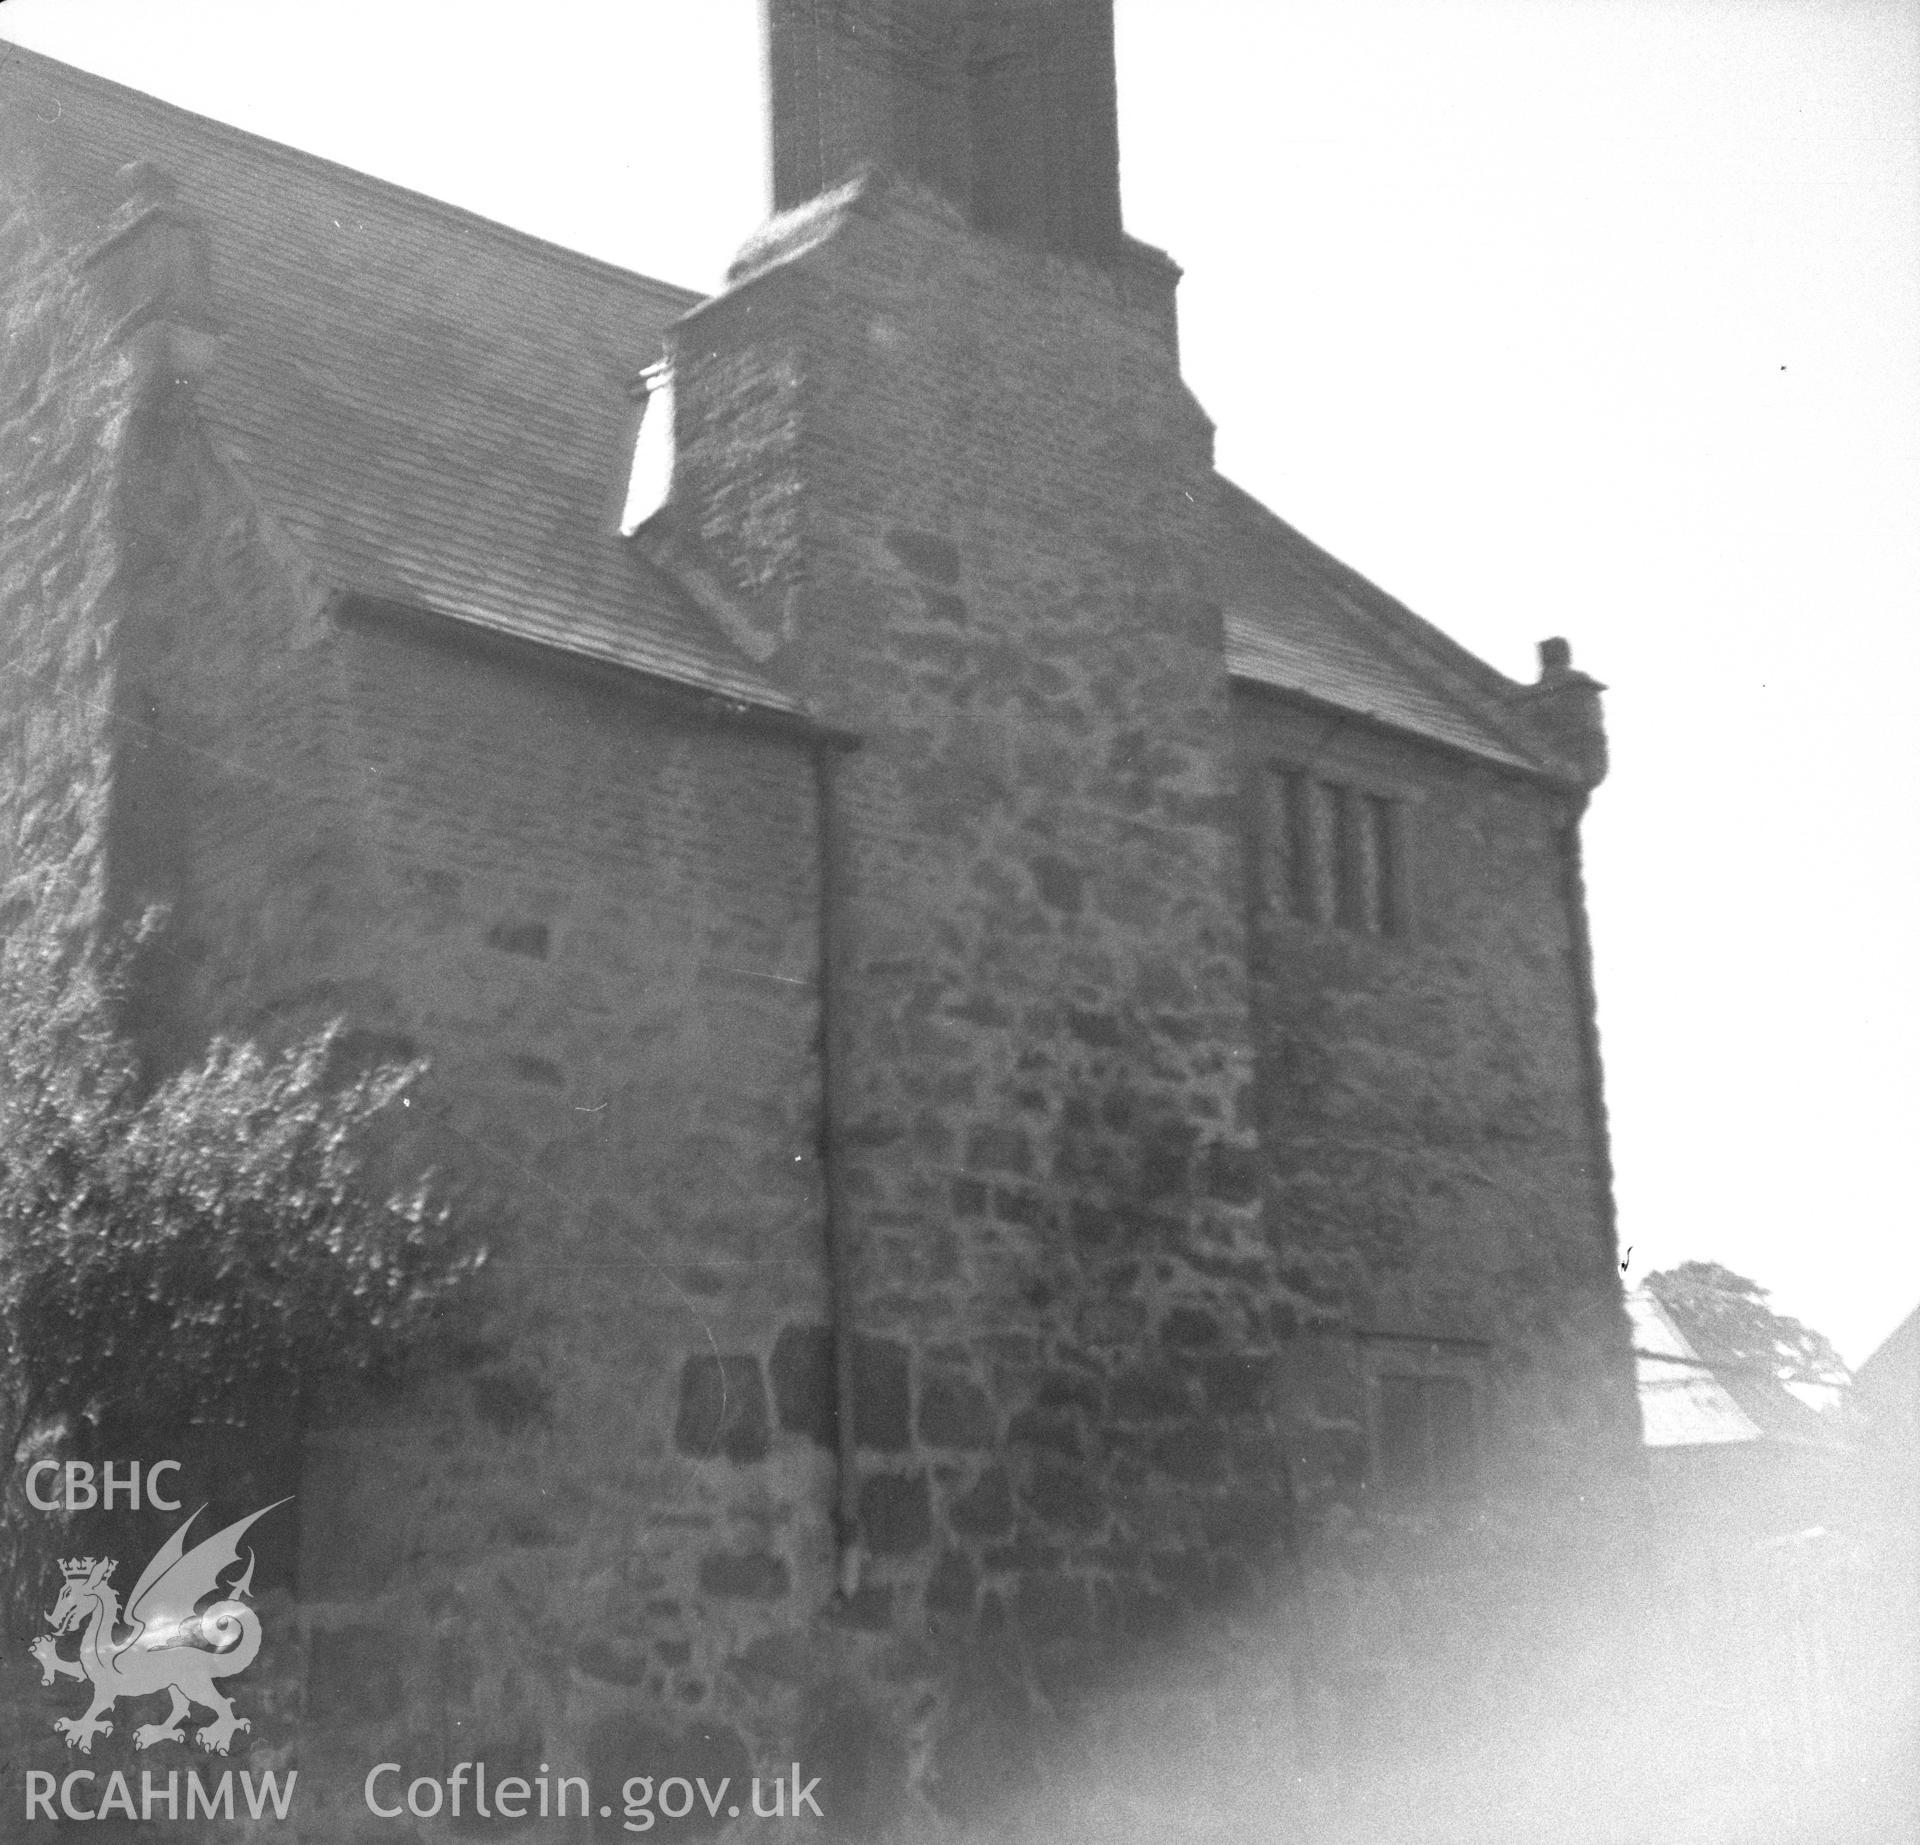 Black and white nitrate negative showing exterior chimney detail, Fferm House, Flintshire.